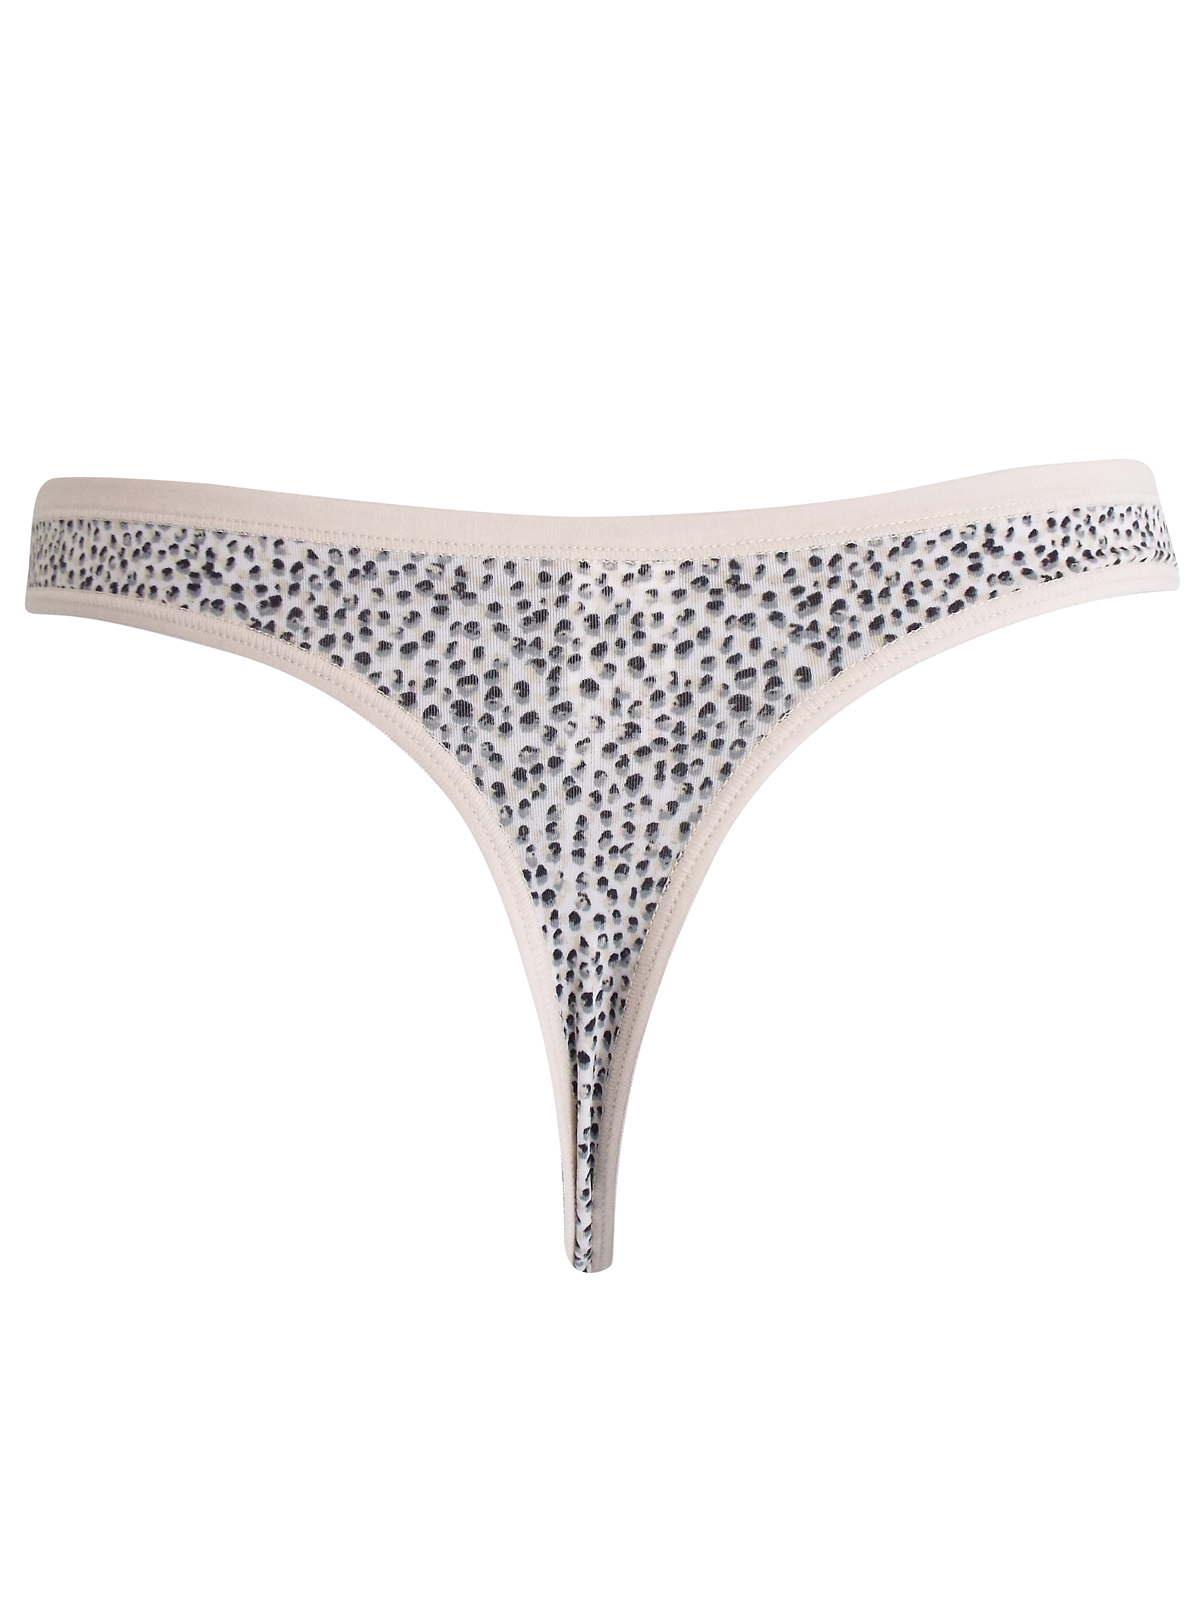 F&F - - F&F IVORY 5-Pack Animal Print Low Rise Thongs - Size 8 to 18